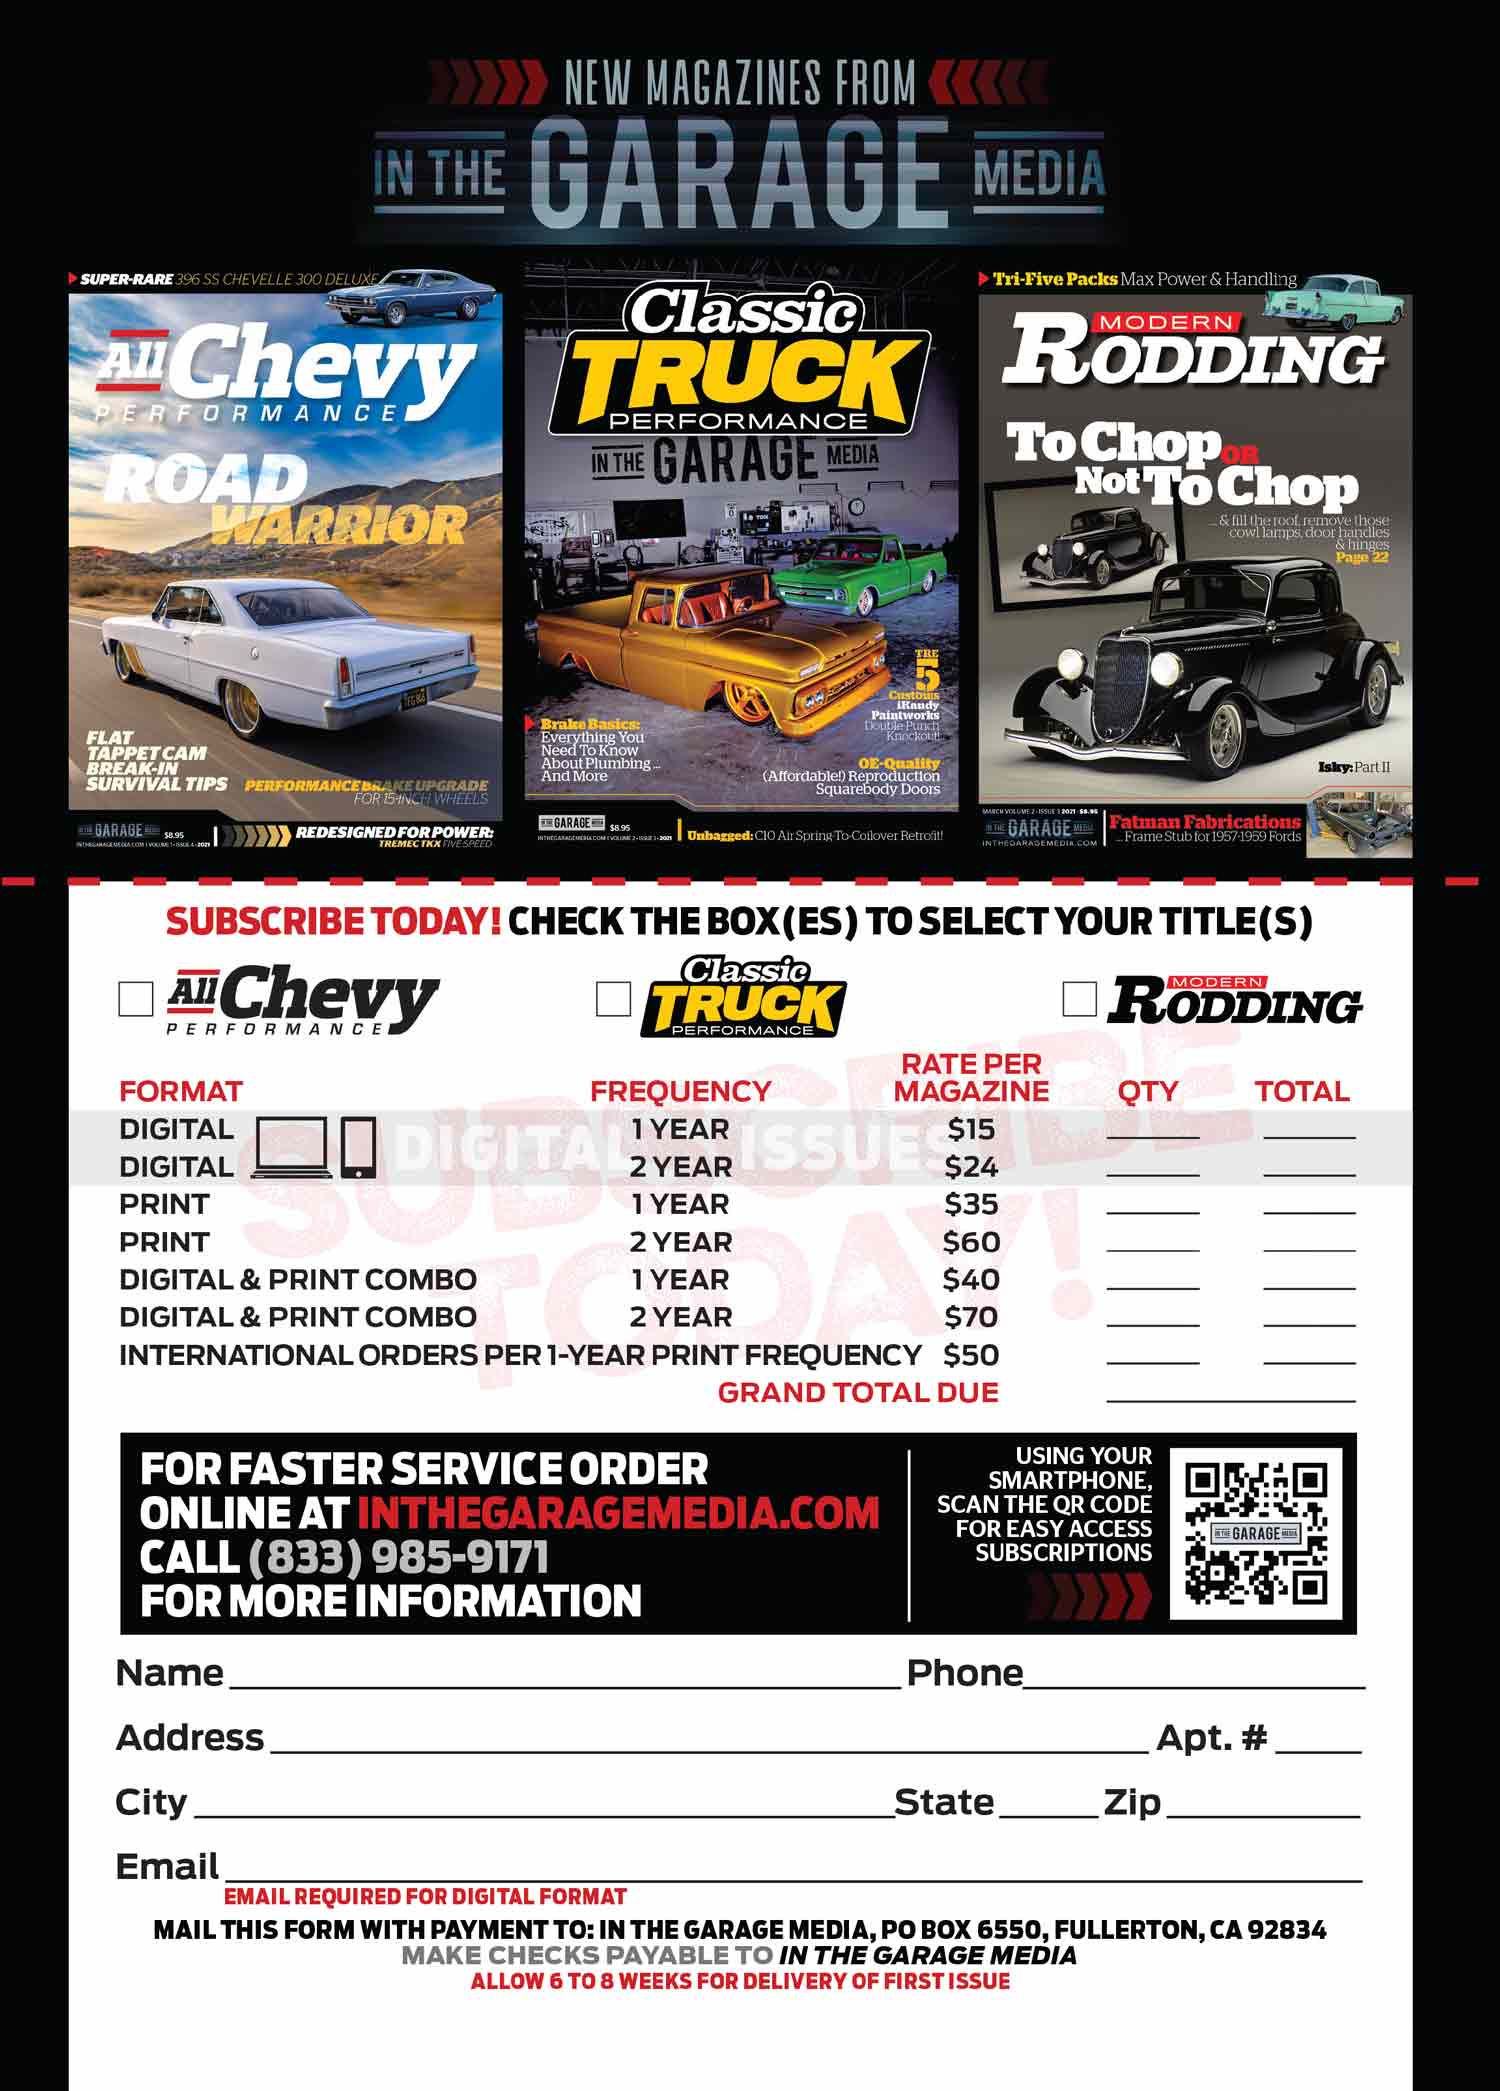 In the Garage Media Subscription Advertisement